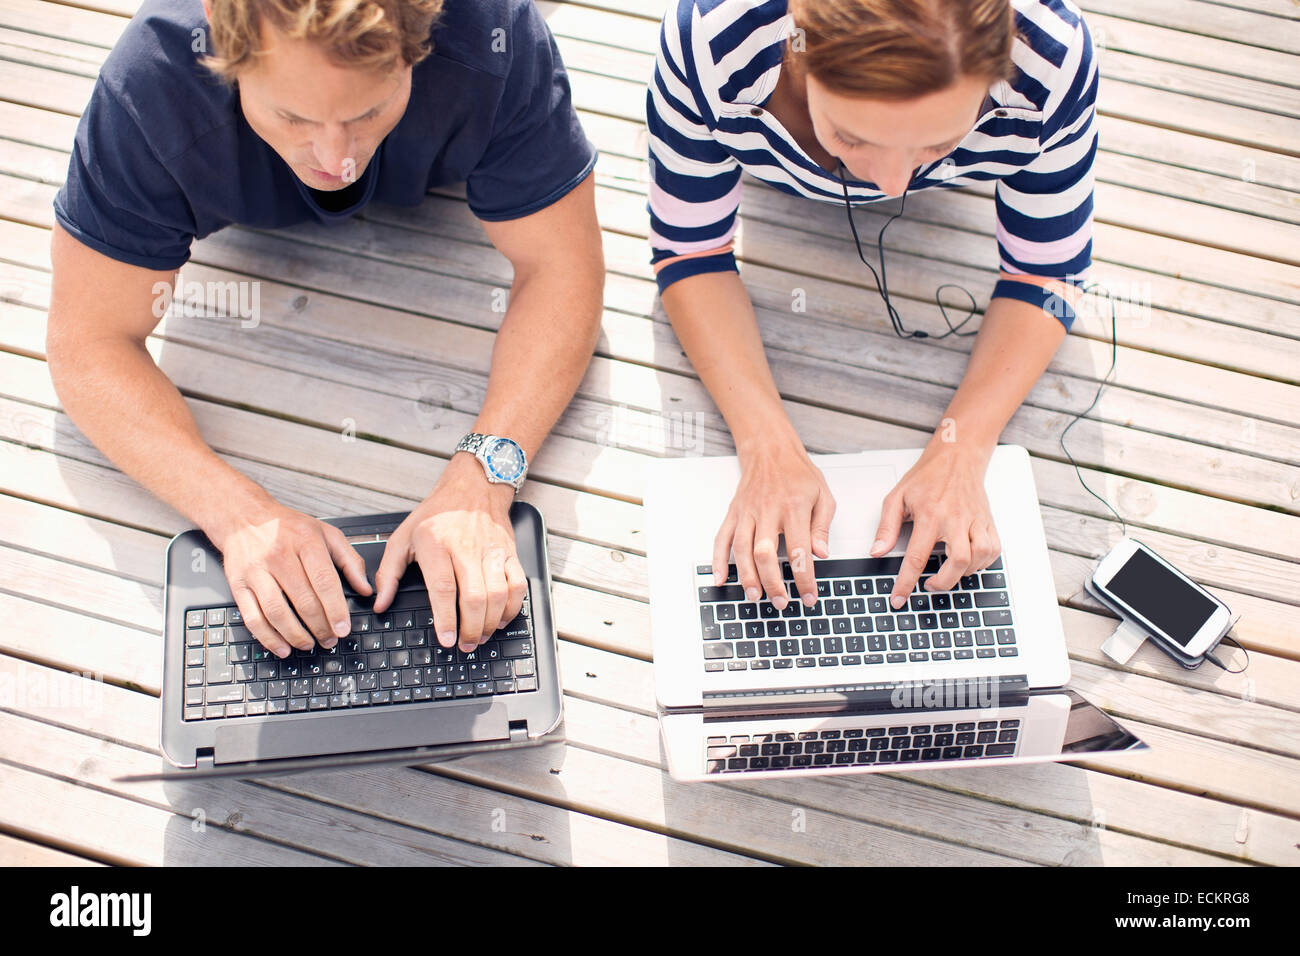 High angle view of mature couple using laptops while lying on pier Stock Photo